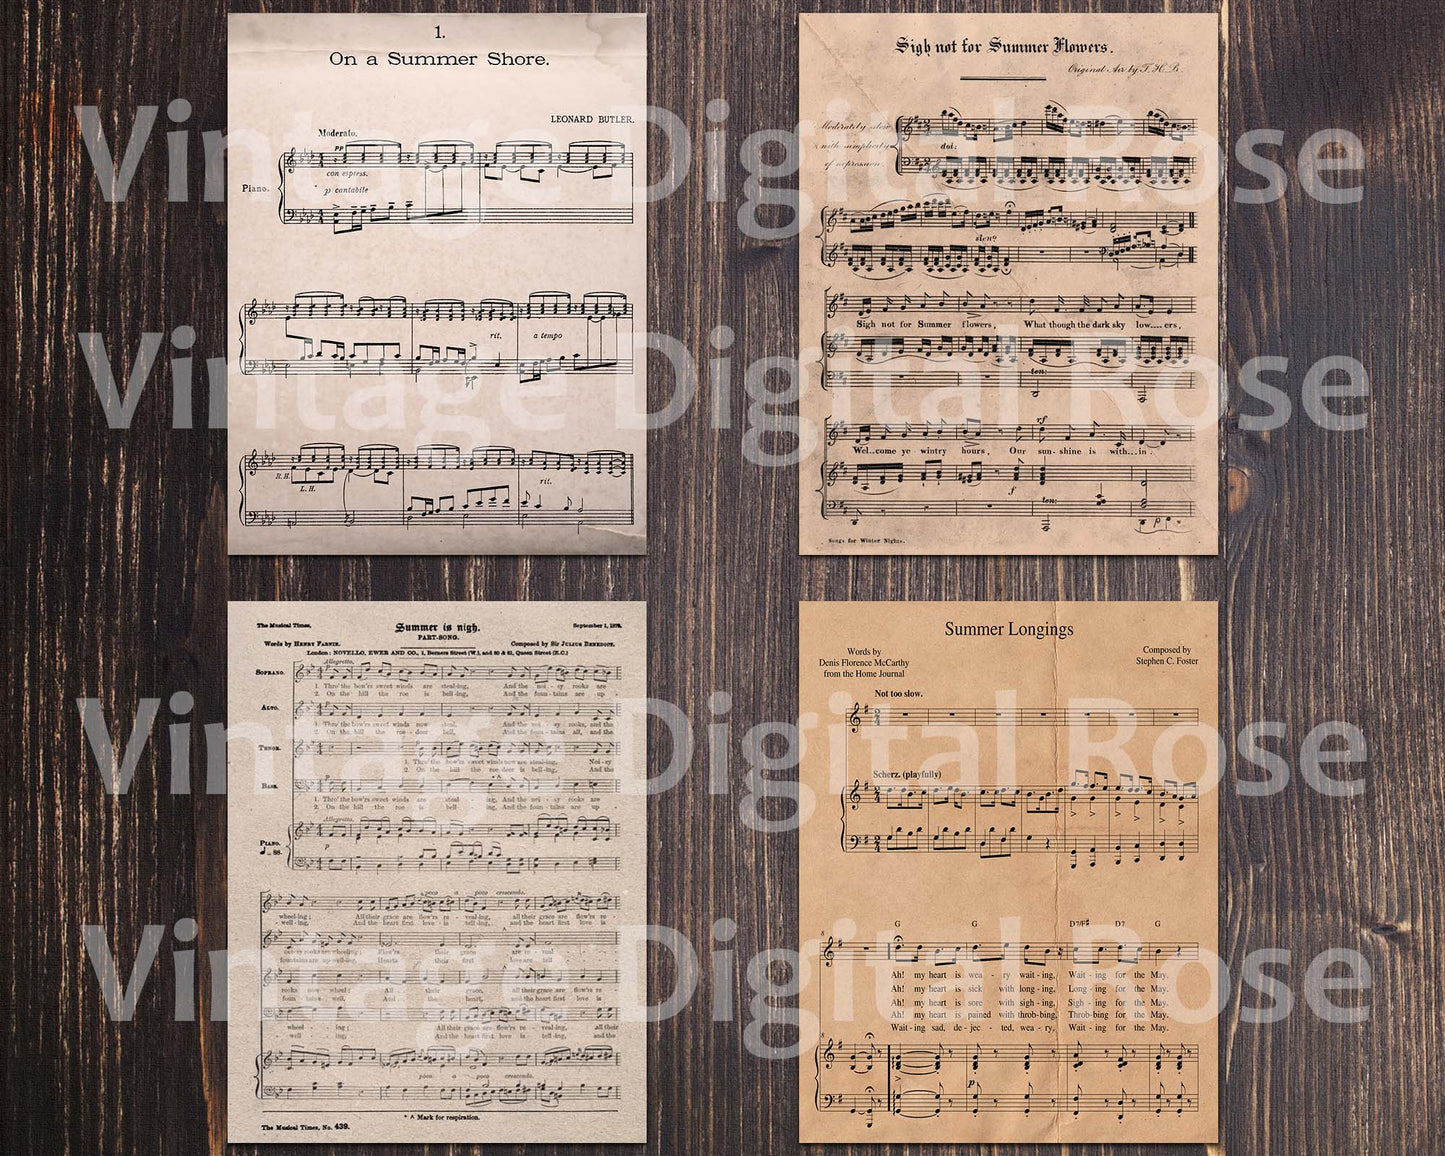 Summer Vintage Sheet Music Pages - 12 8.5x11 Printable Sheet Music Papers